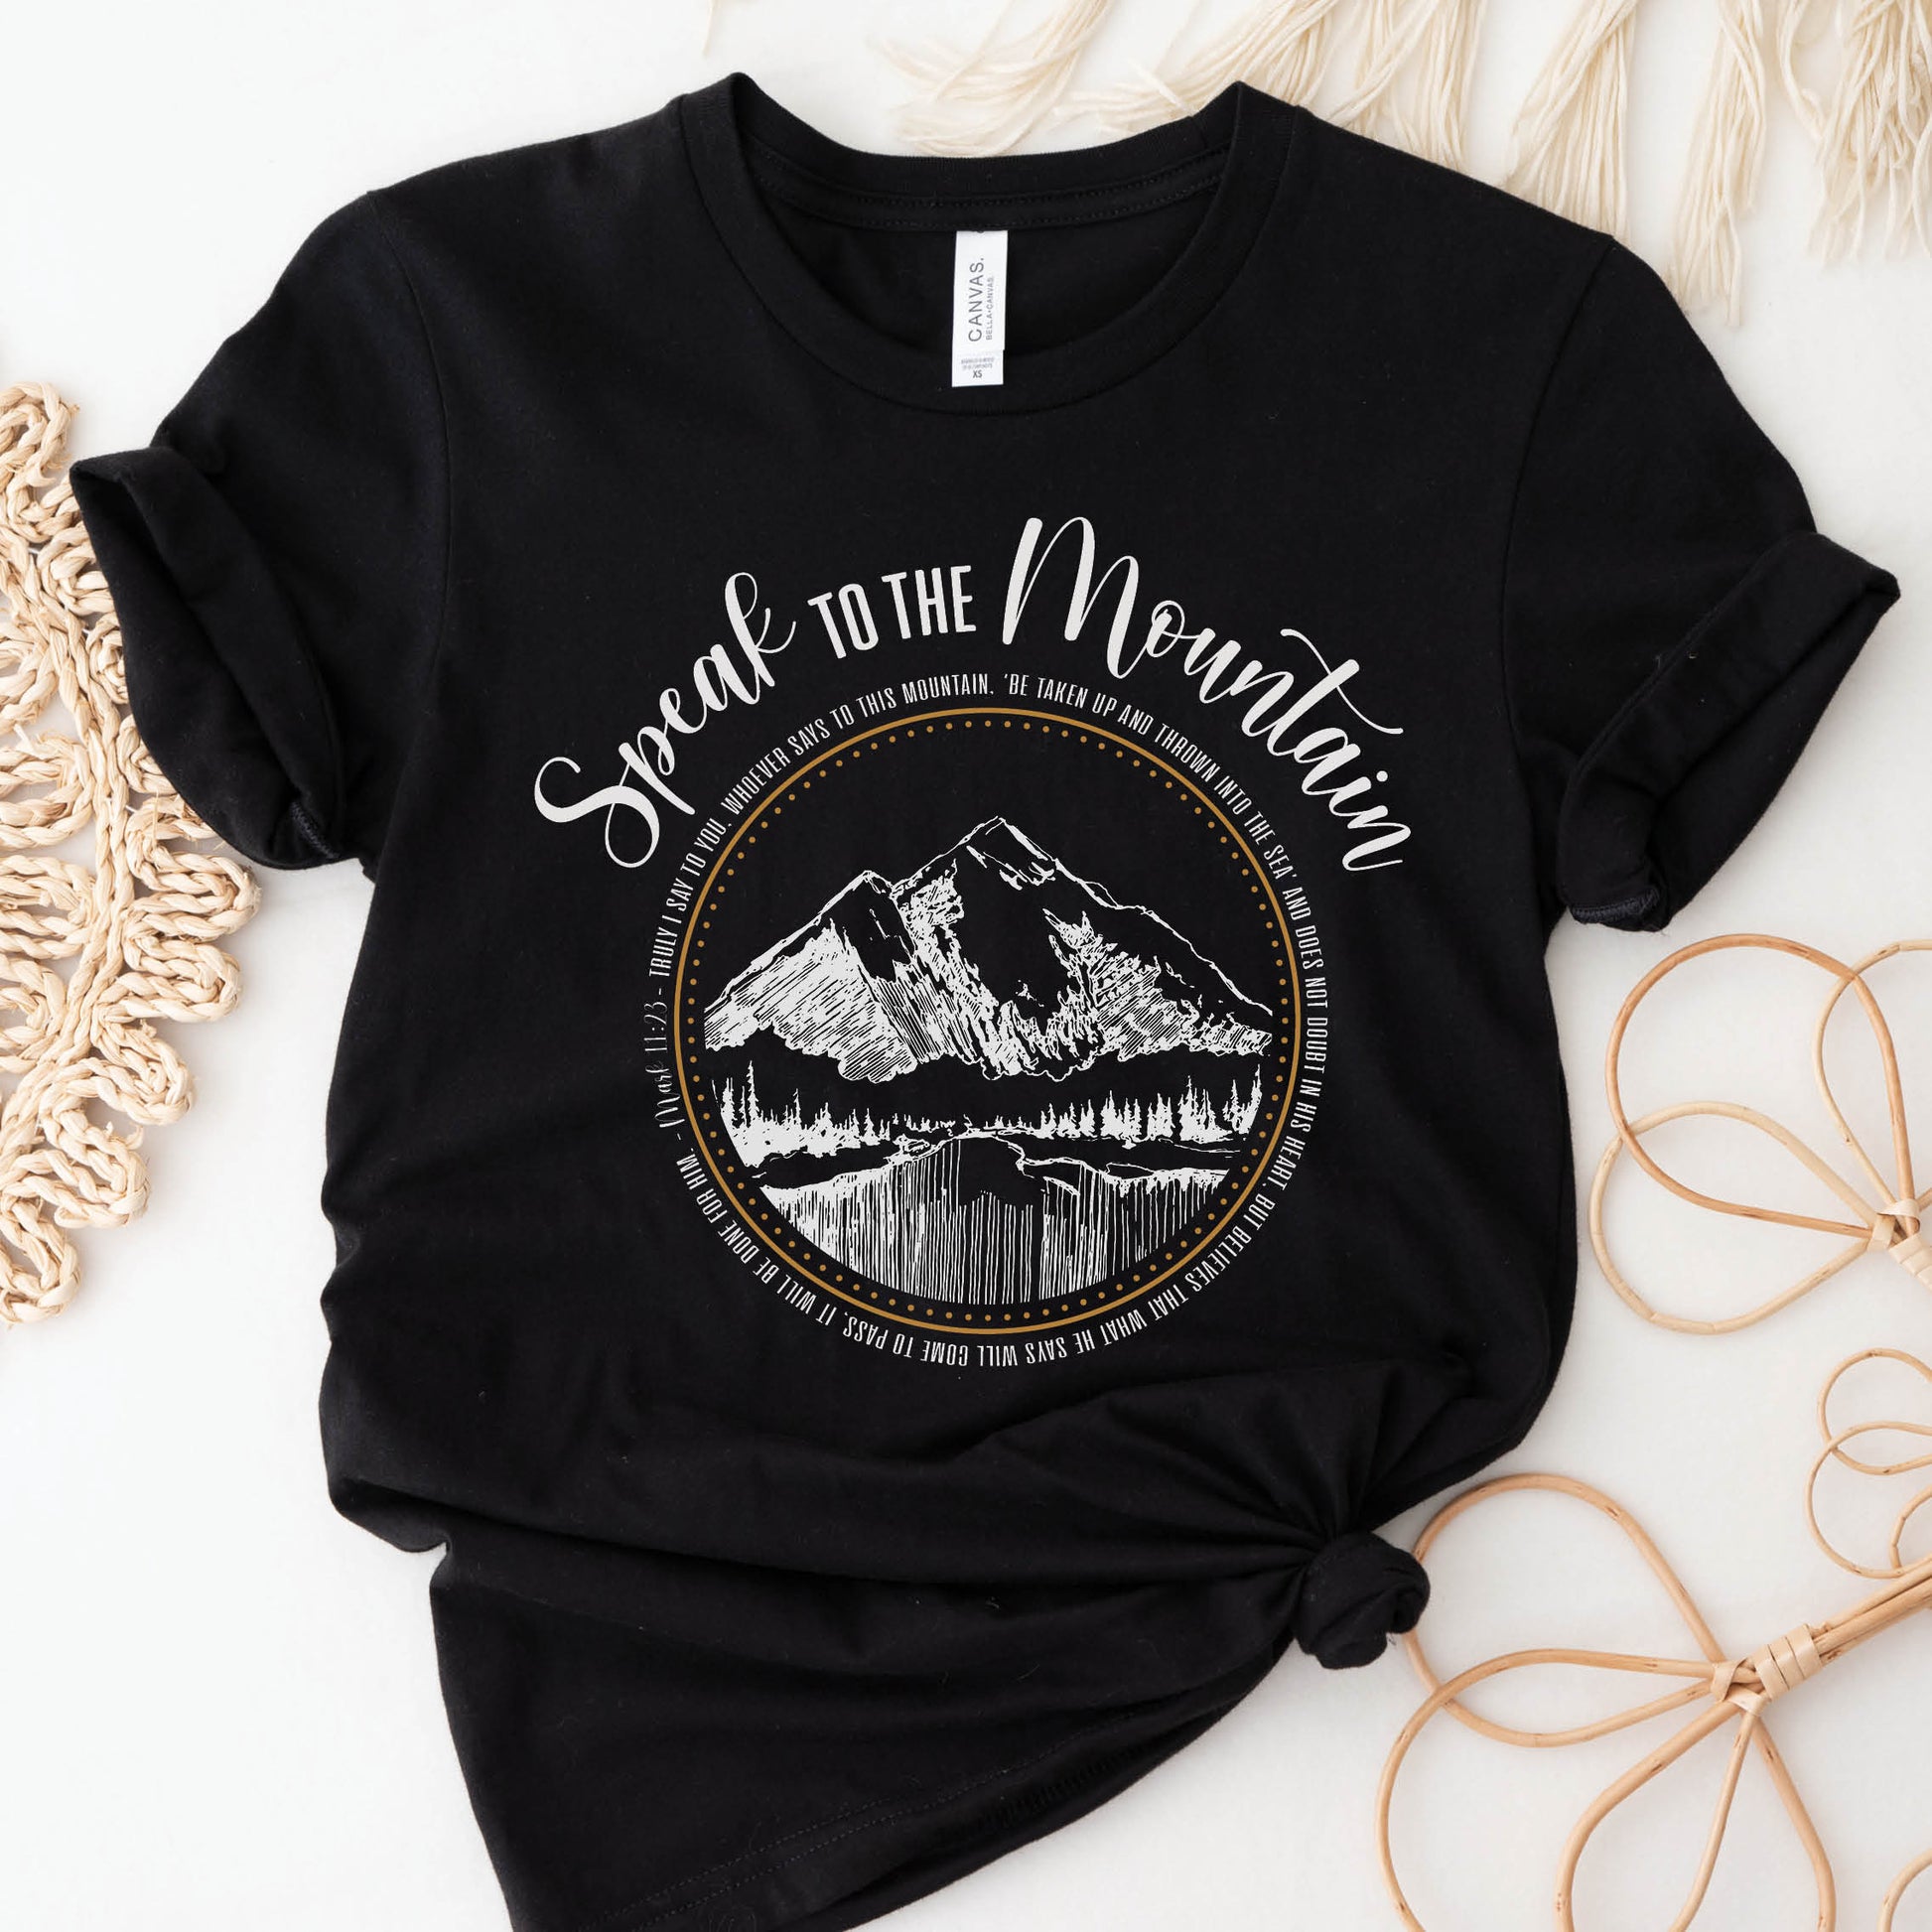 Speak to the Mountain Christian black unisex graphic t-shirt with Mark 11:23 Whosoever Believes scripture faith-based tee, designed for women